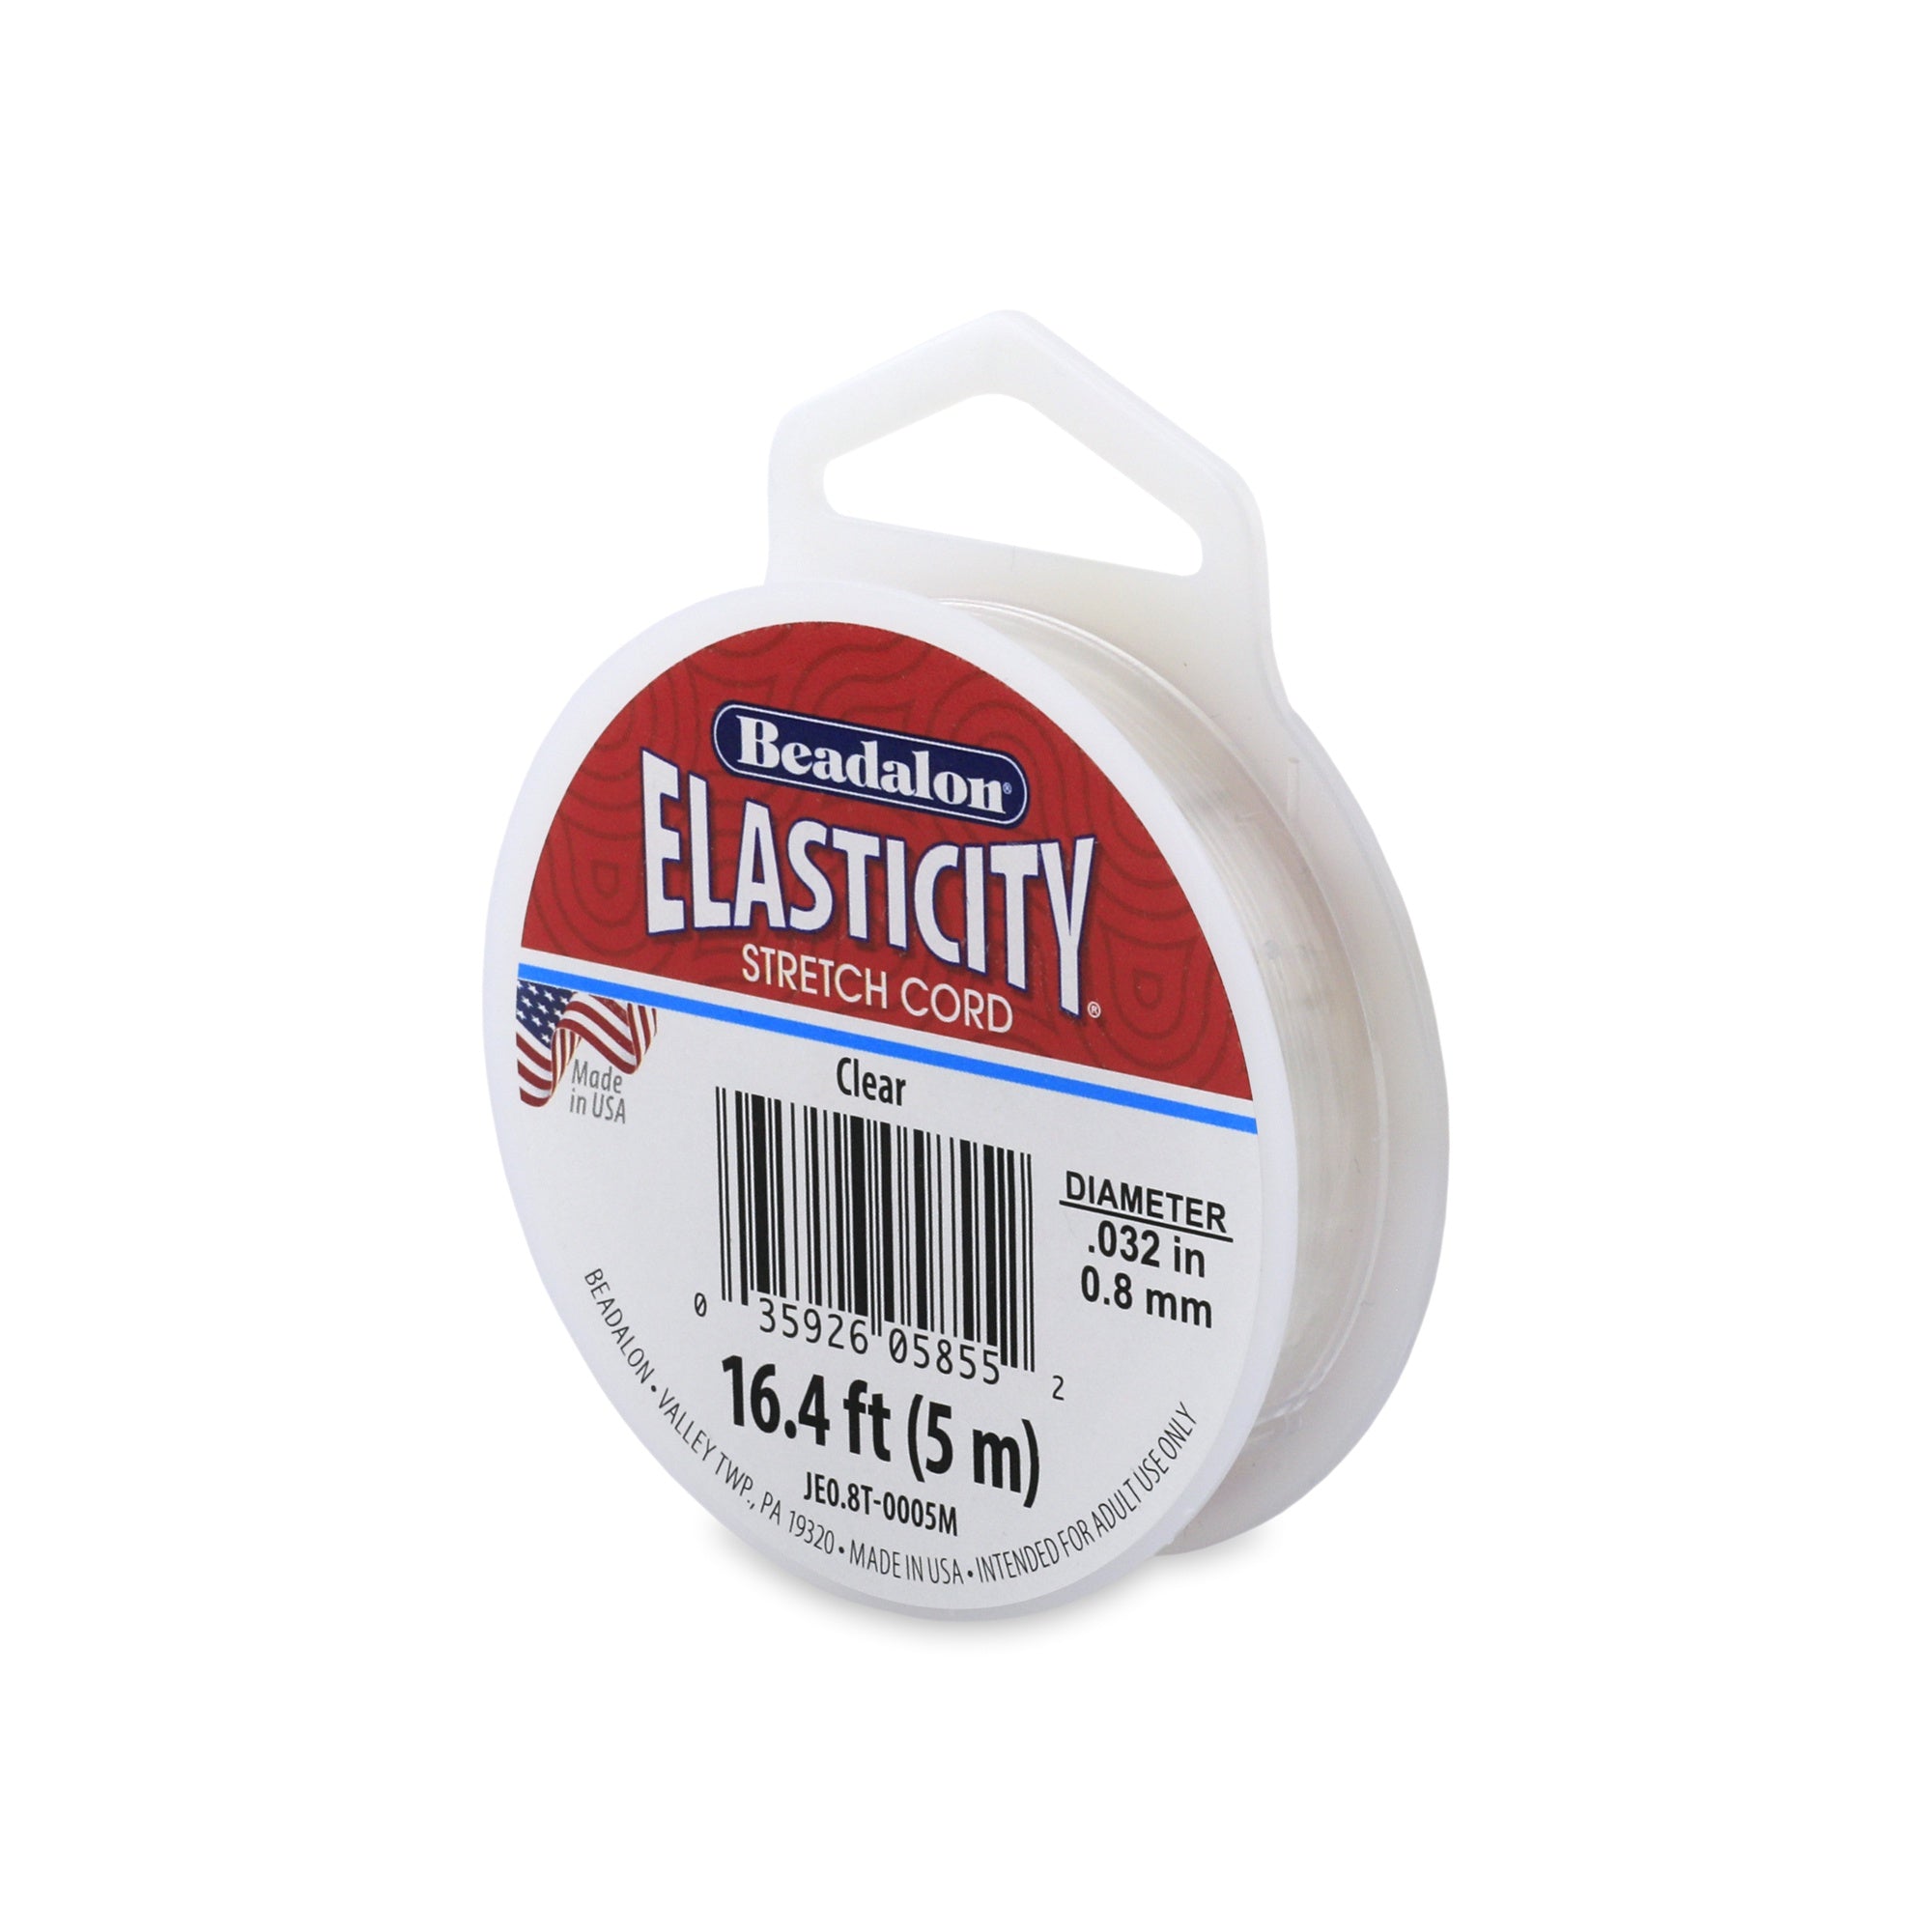 Elasticity Stretch Cord, 0.8 mm / .032 in, Clear, 5 meter